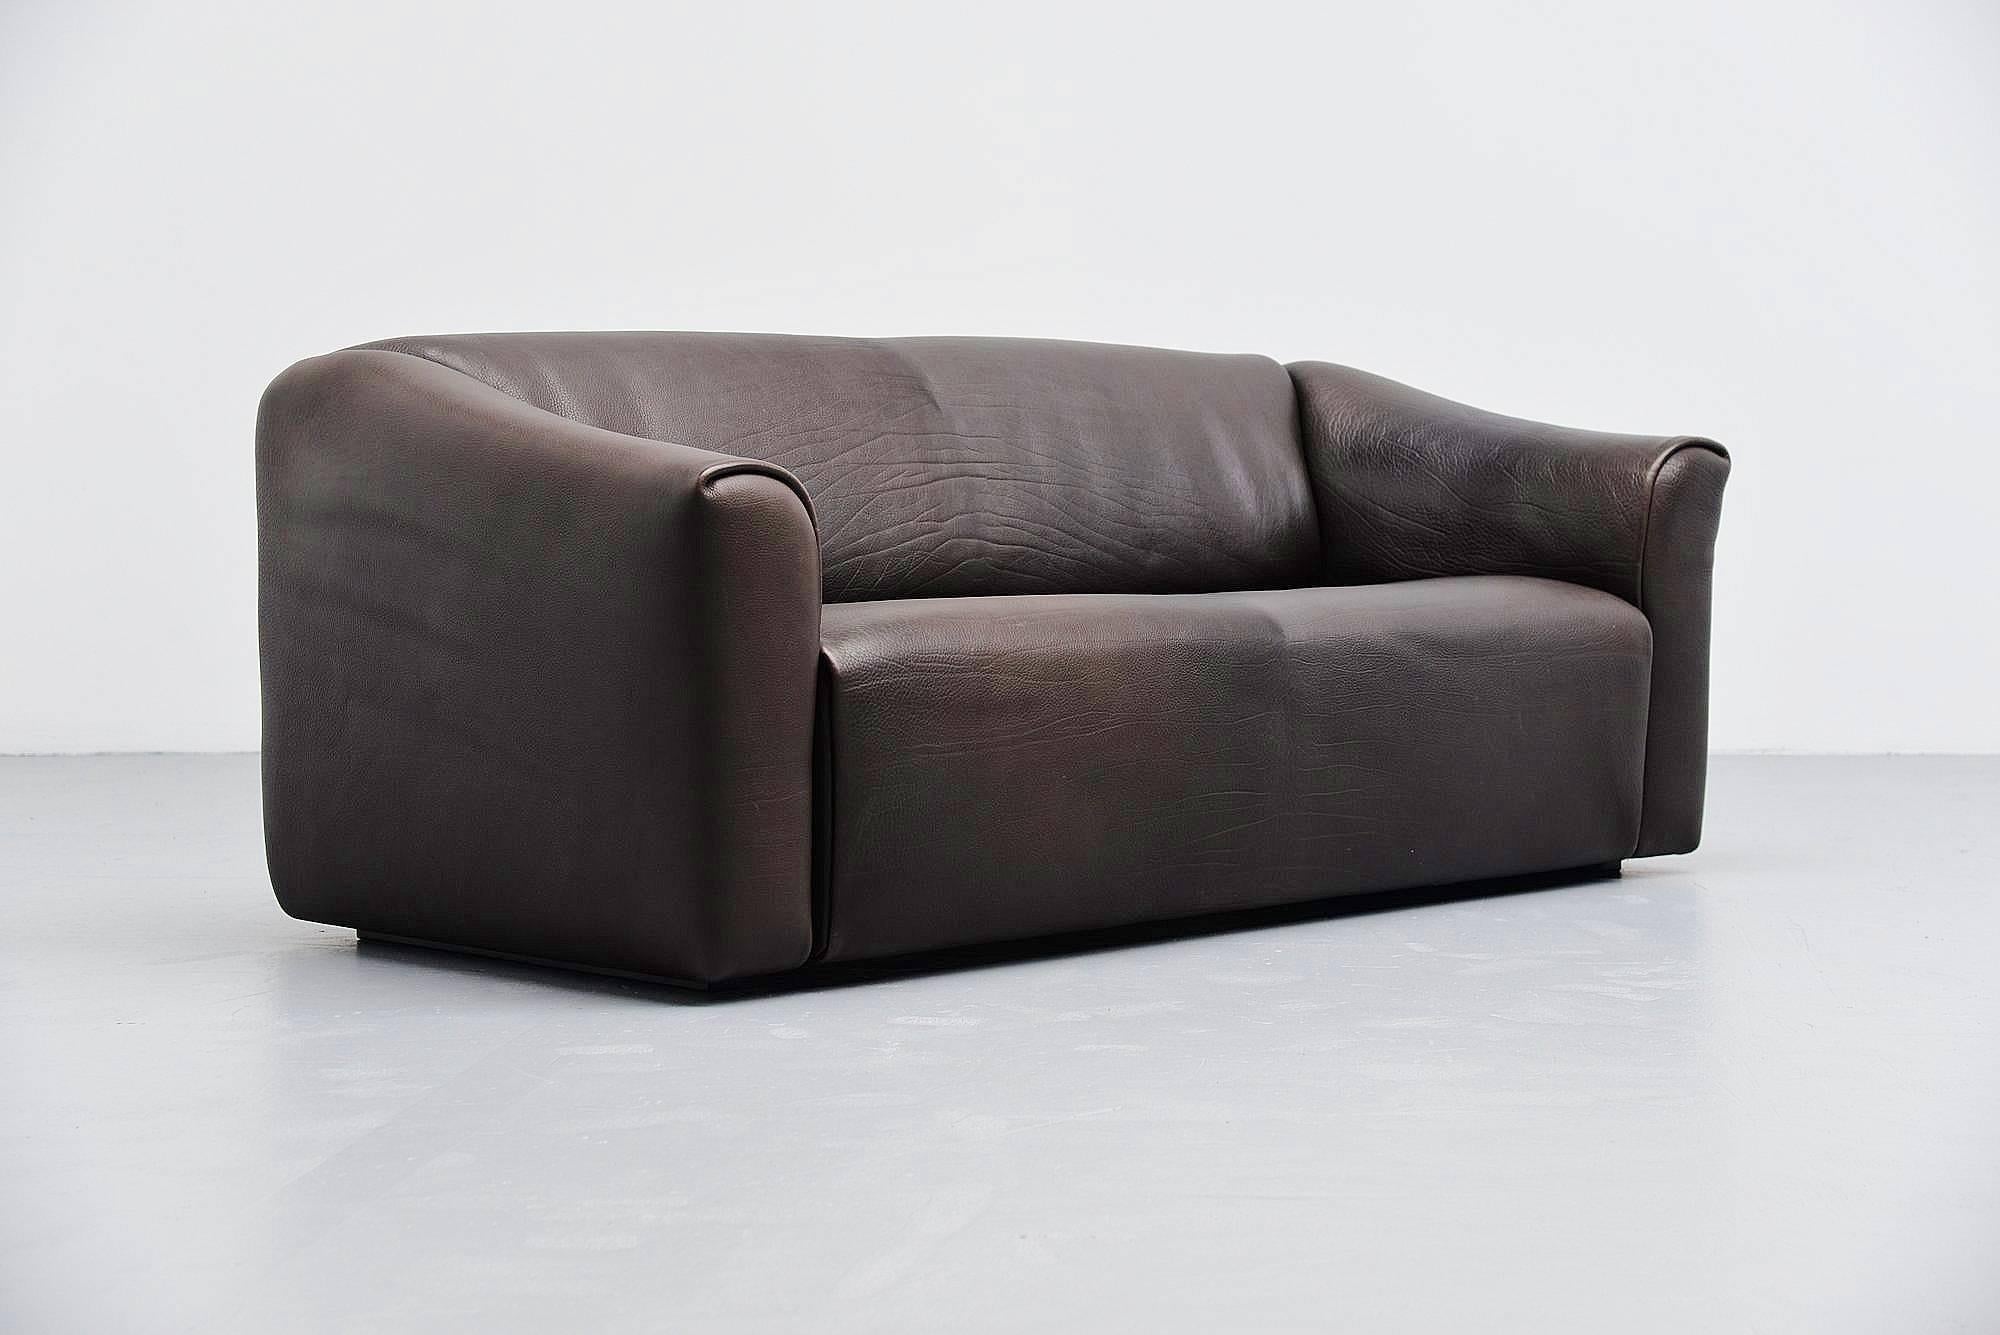 Comfortable and extractable lounge sofa designed and made by De Sede, Switzerland, 1970. This is for model DS47/3. The sofa is made of high quality dark brown buffalo leather. De Sede is known for its supreme quality leather and comfort seating. The